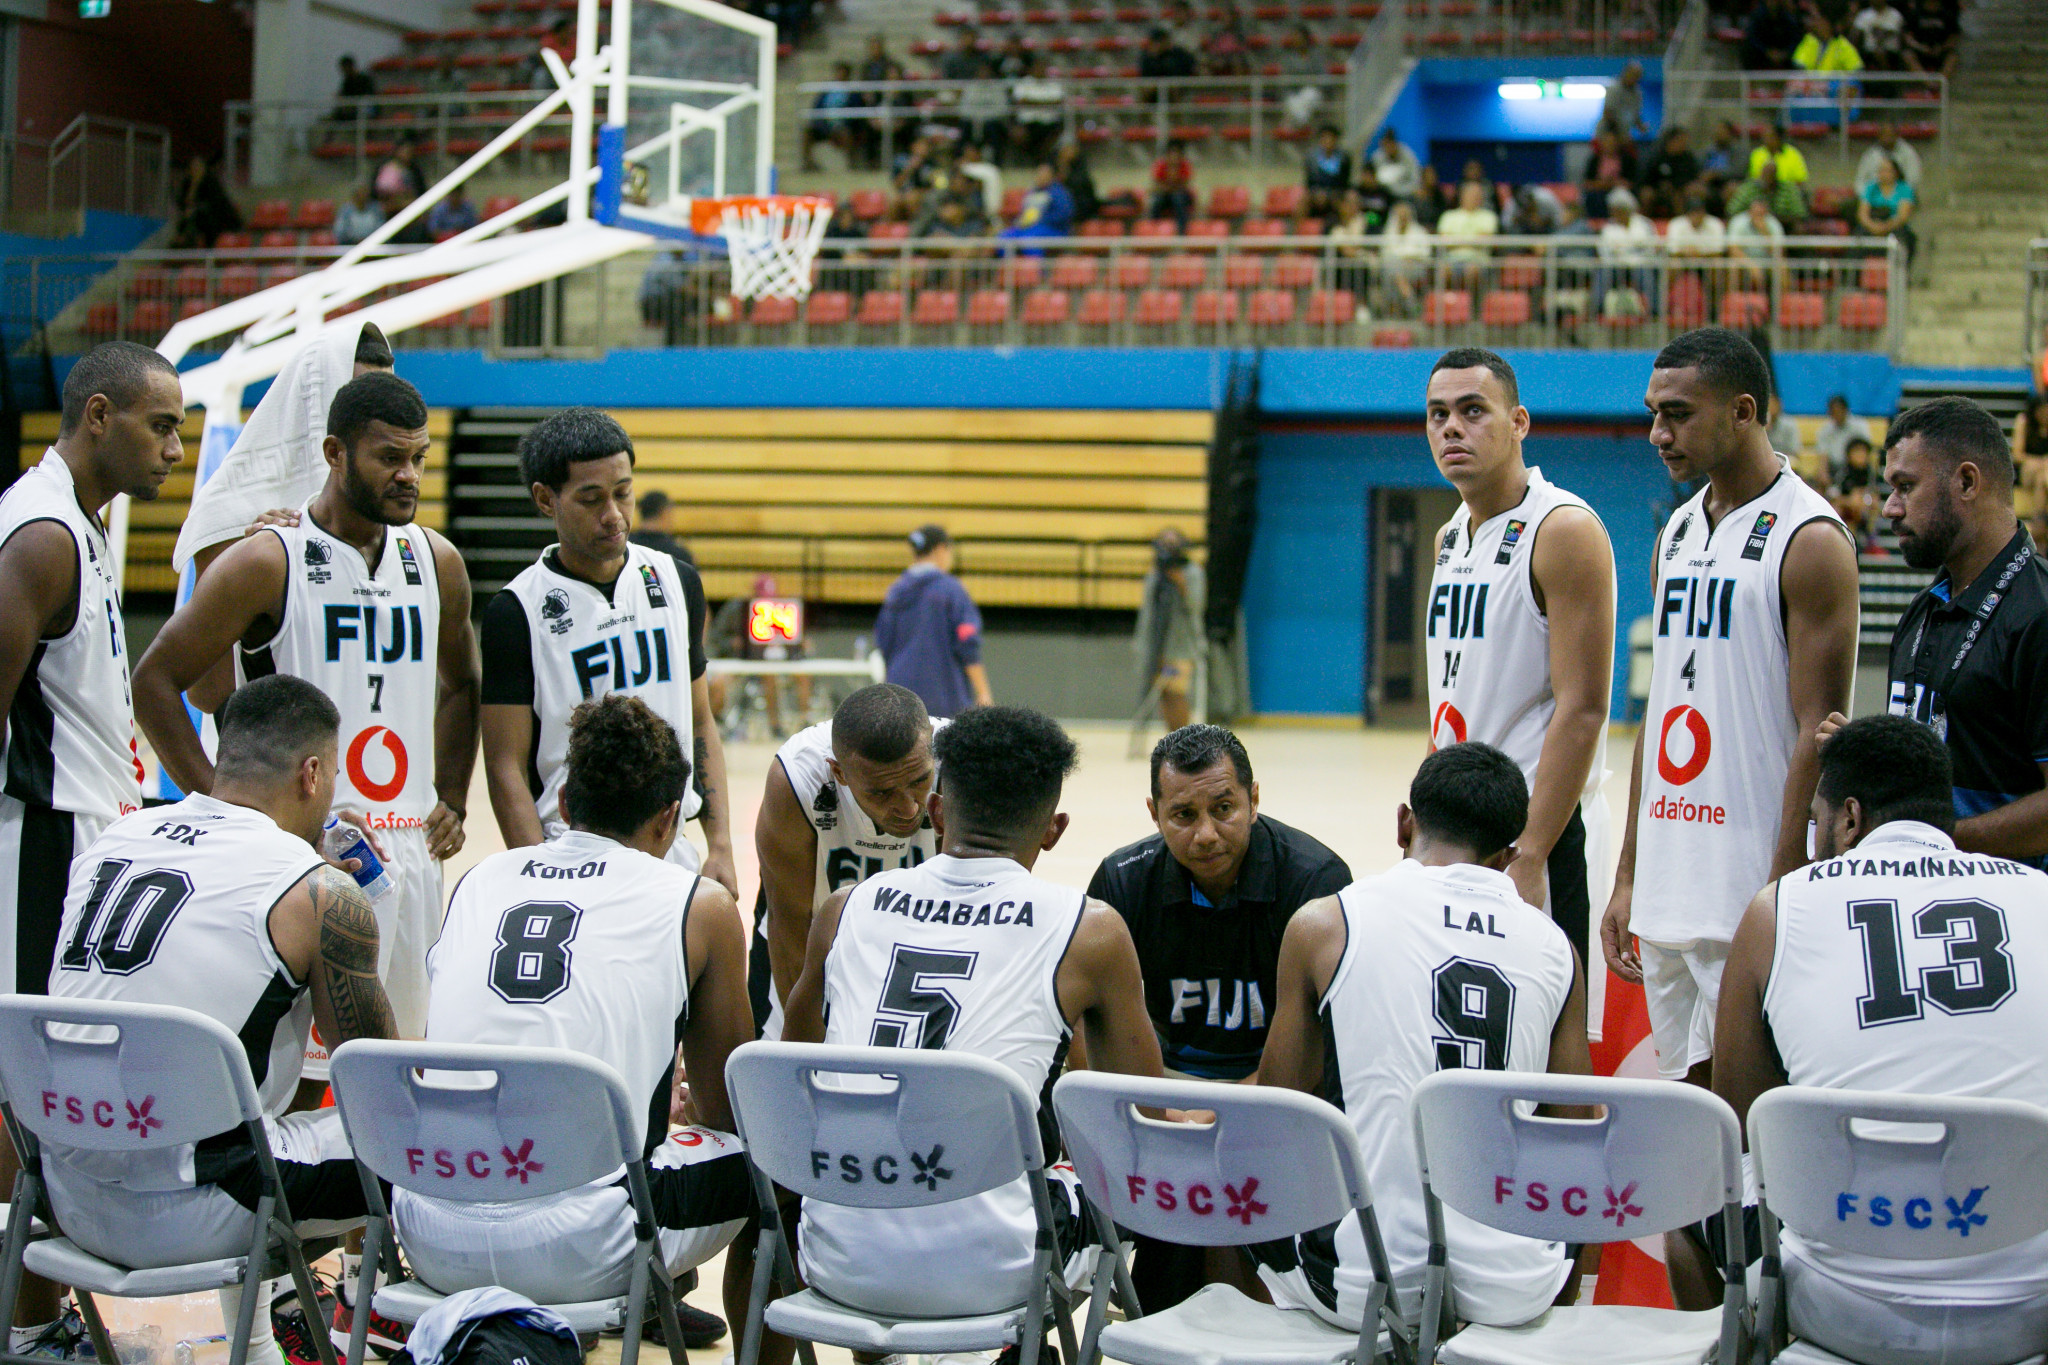 Fiji's men have not won the Pacific Games basketball gold medal since Apia 2007 ©Basketball Fiji 